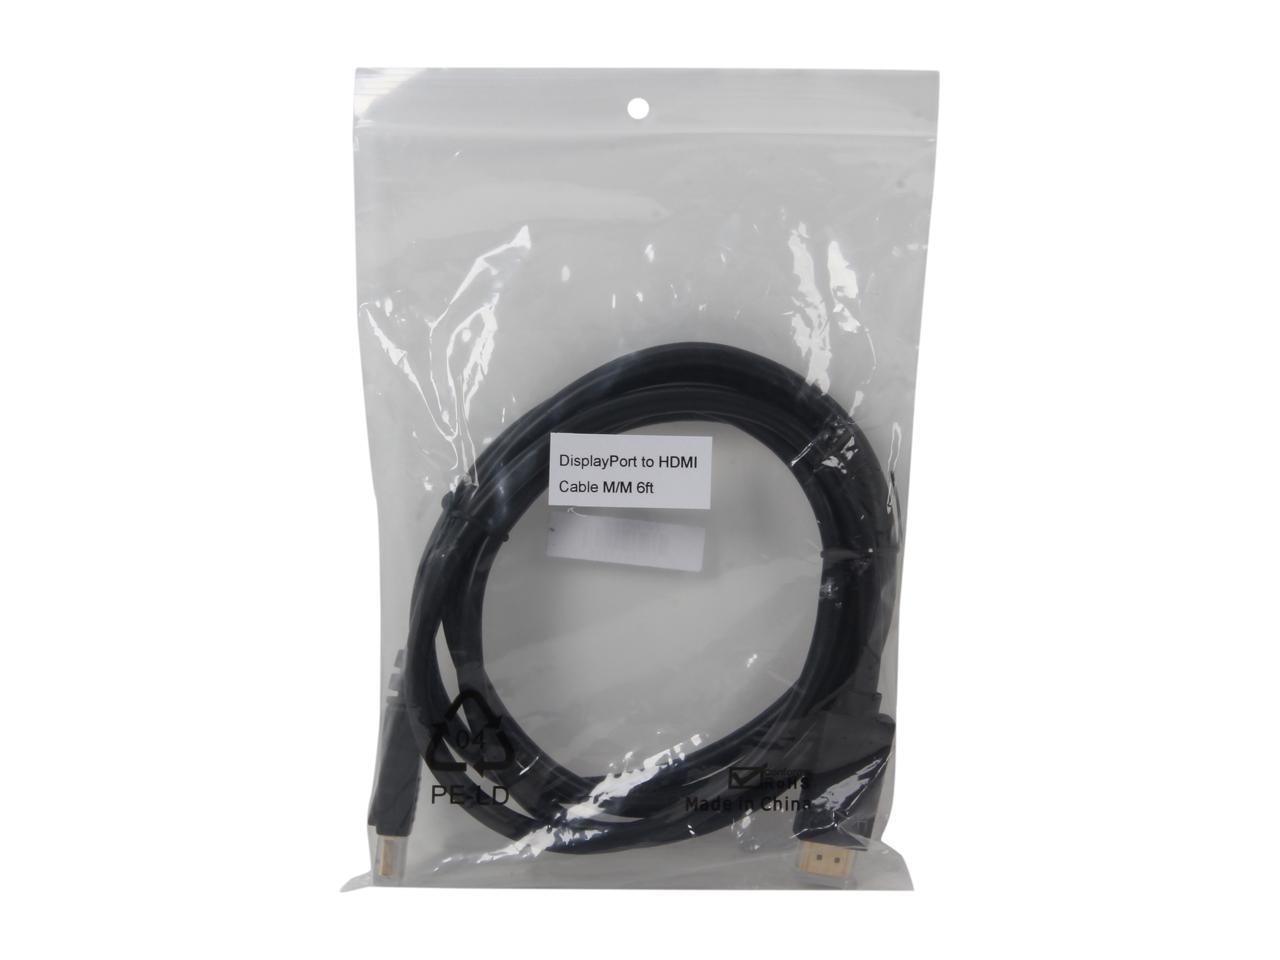 Nippon Labs DP-HDMI-6 6 ft. DisplayPort to HDMI Converter Cable Supporting VR / 3D / 4K, Black - DP to HDMI Adapter - (M/M) - image 3 of 3